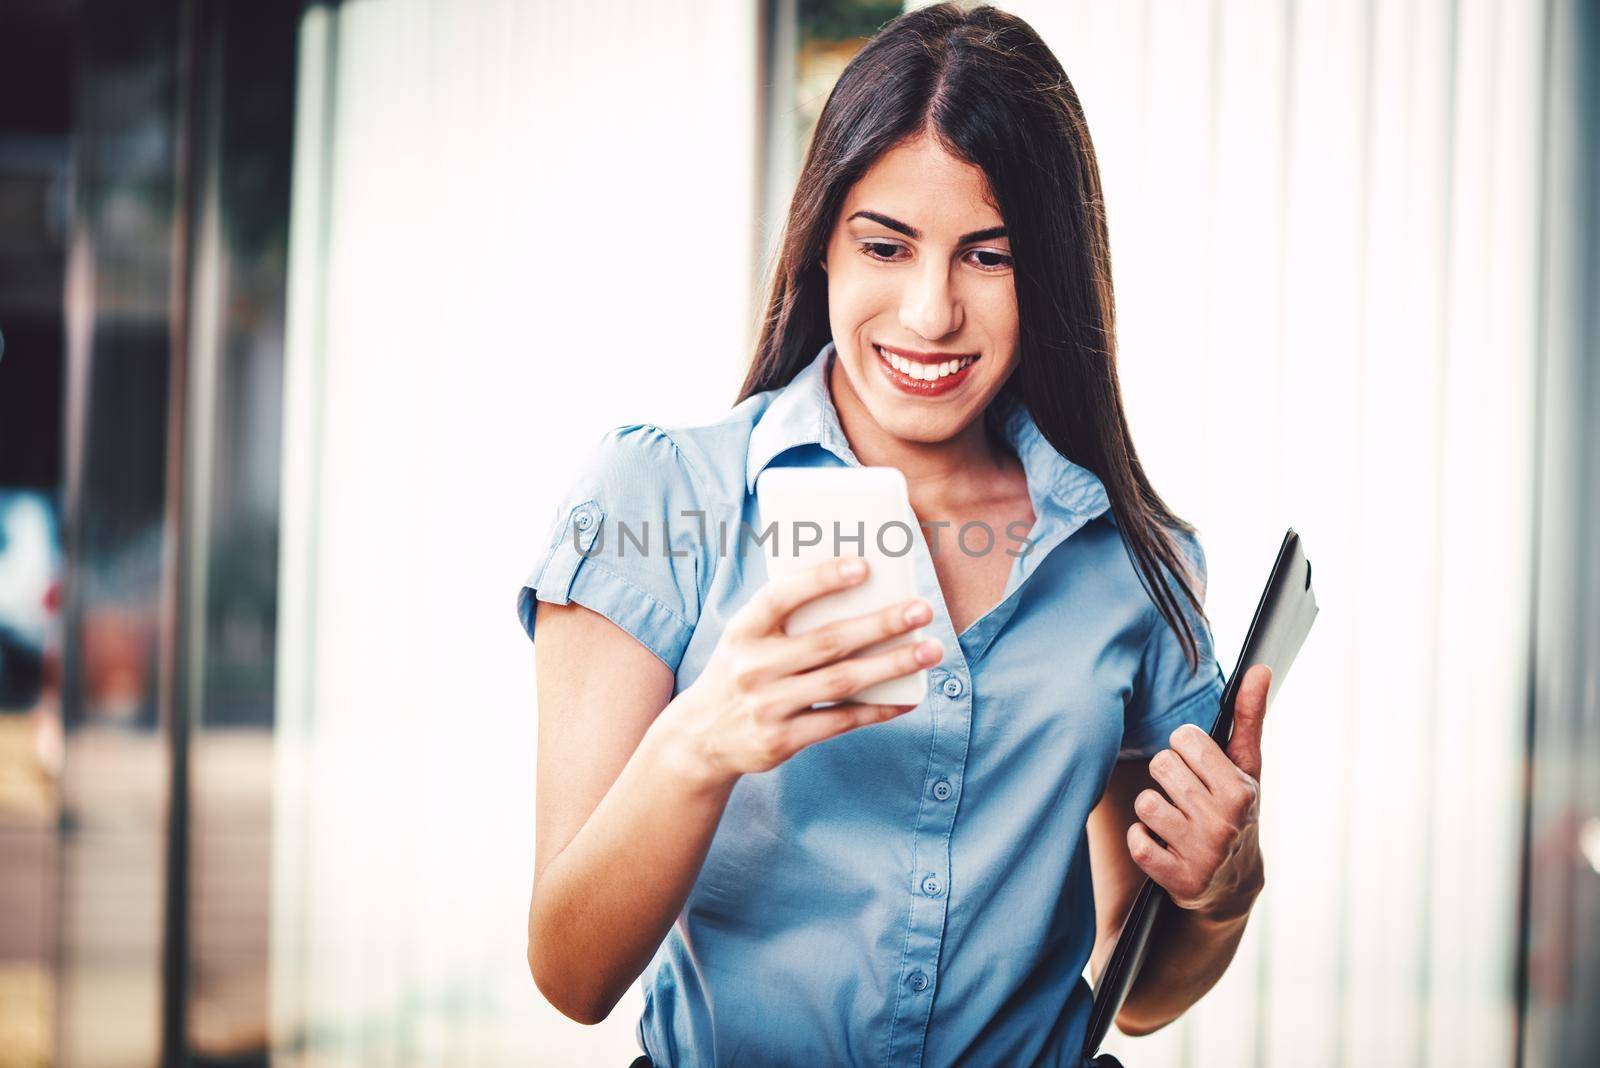 Emotional portrait of a happy and beautiful young businesswoman texting on a smartphone and carries a file document on the background of a business center.